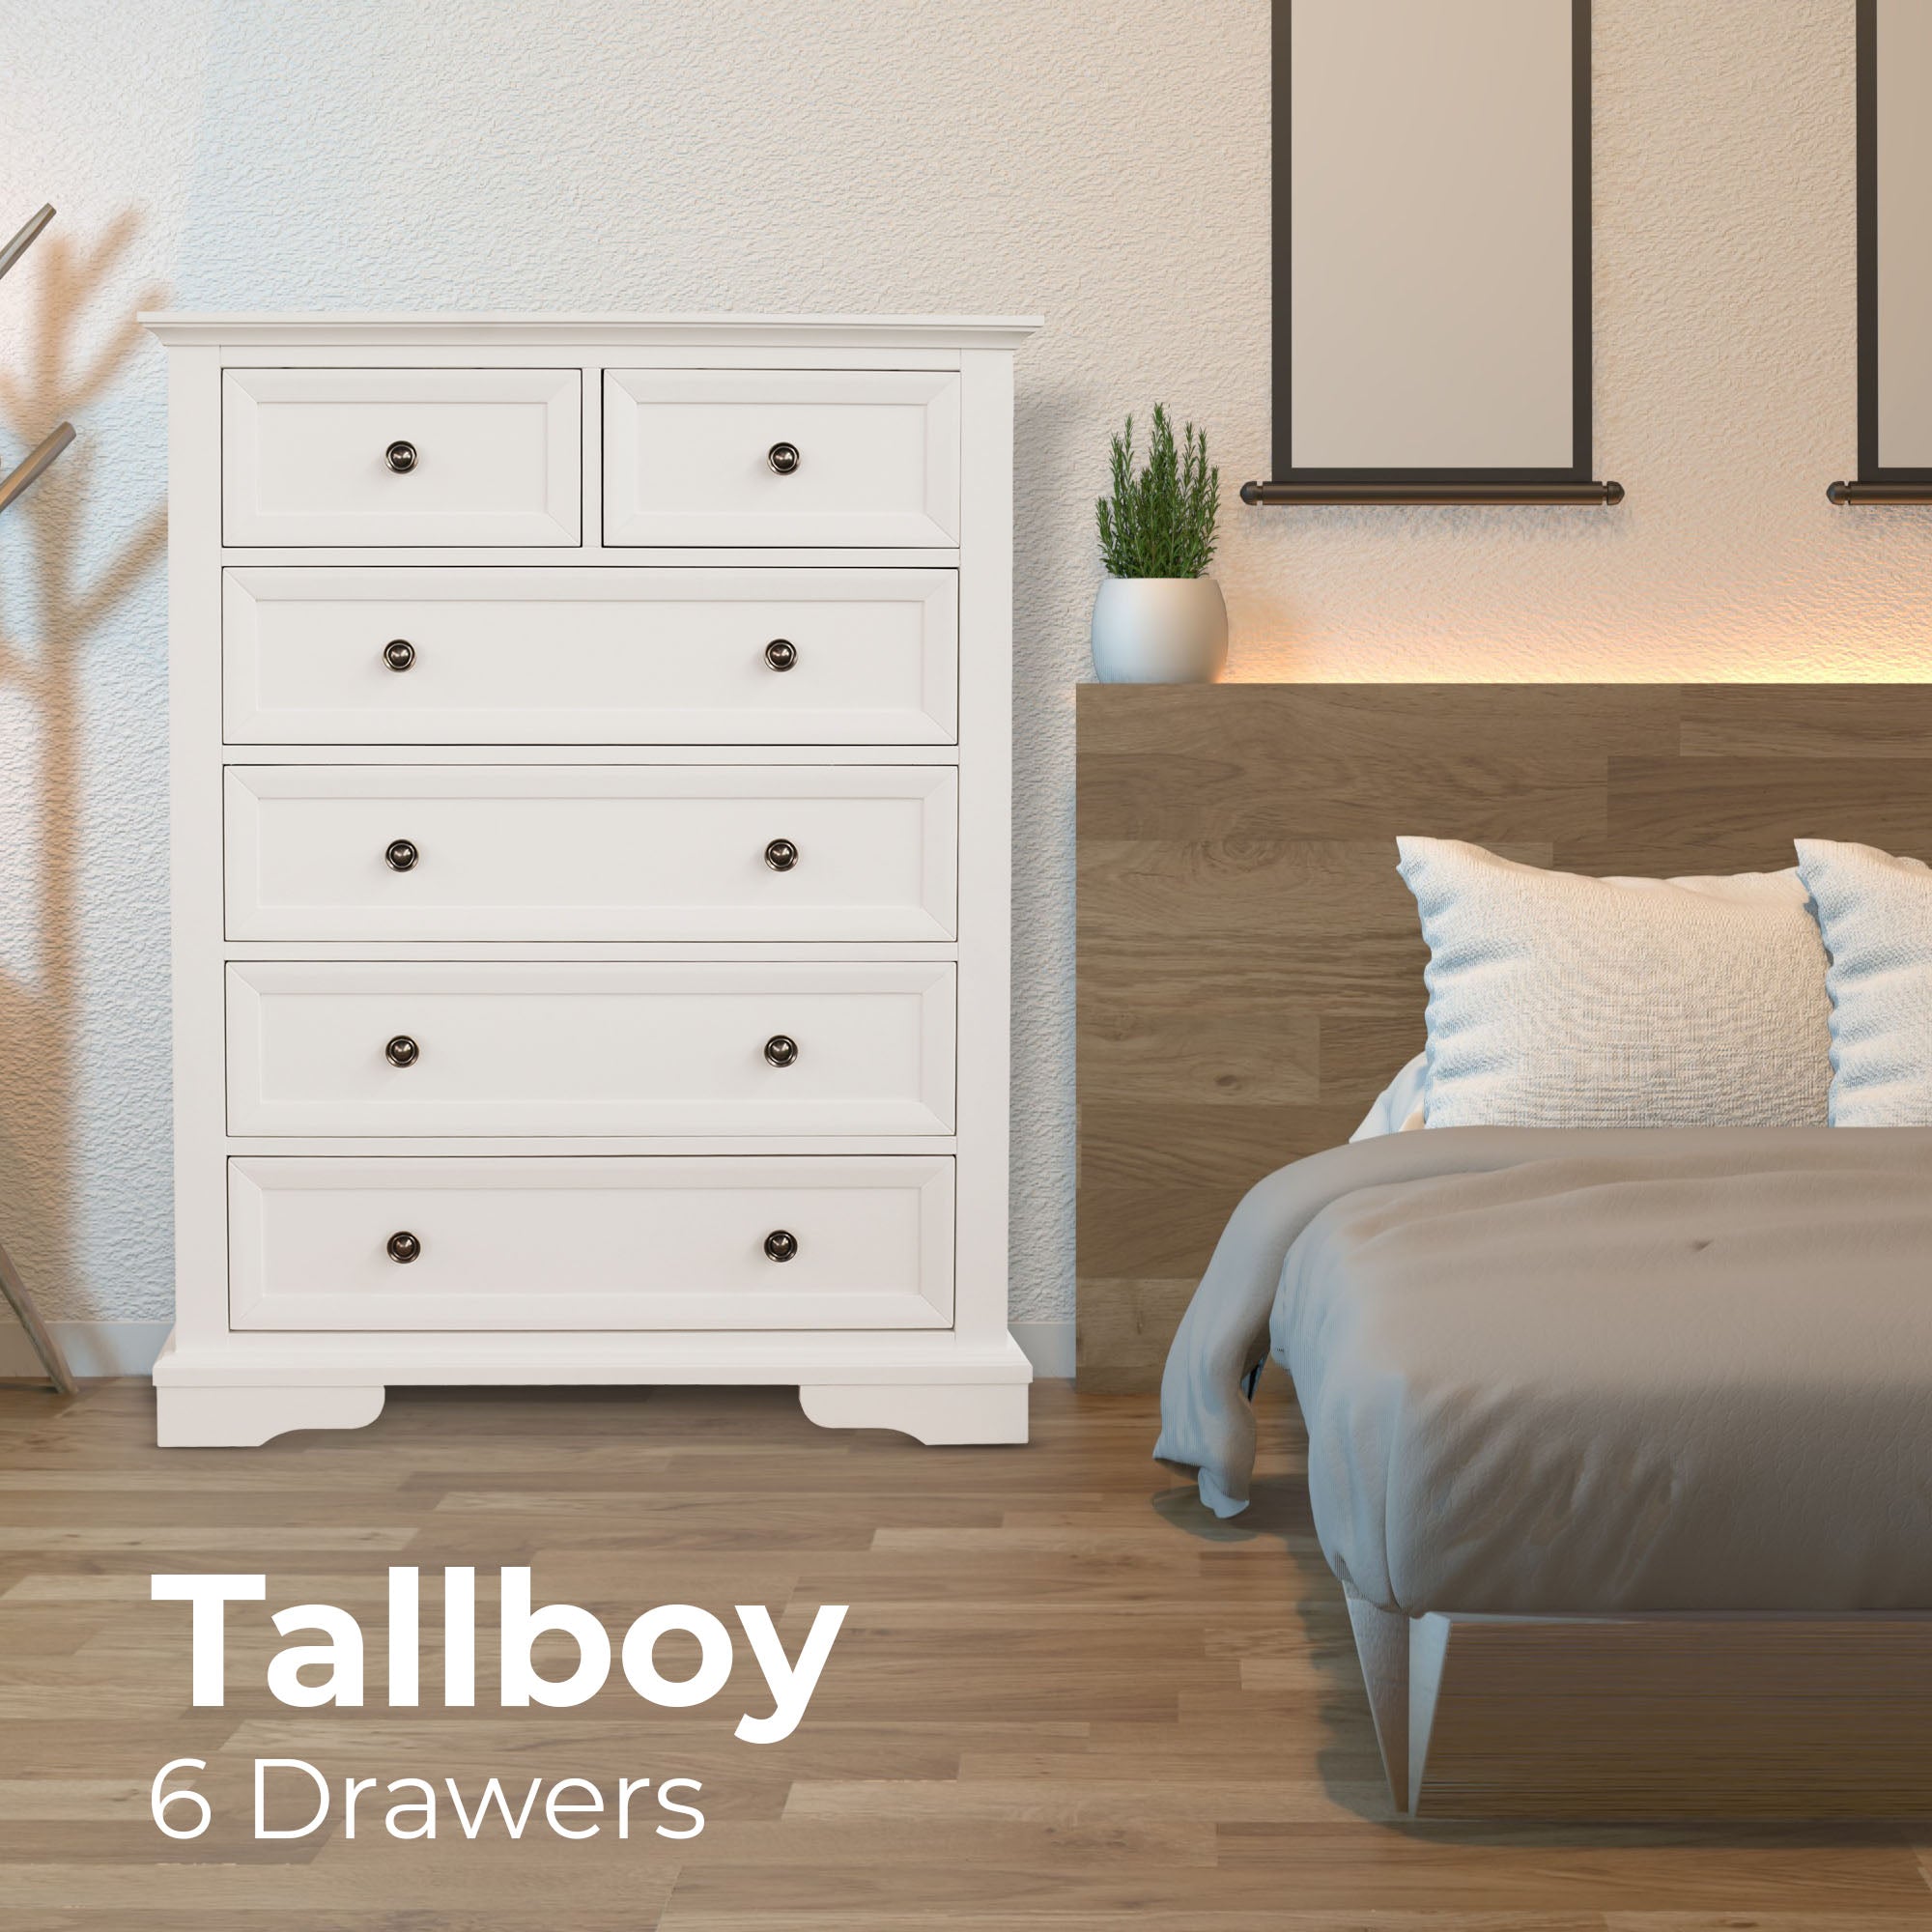 No Assembly Required! Quality Tallboy 6 Drawers Solid Acacia Wood - White